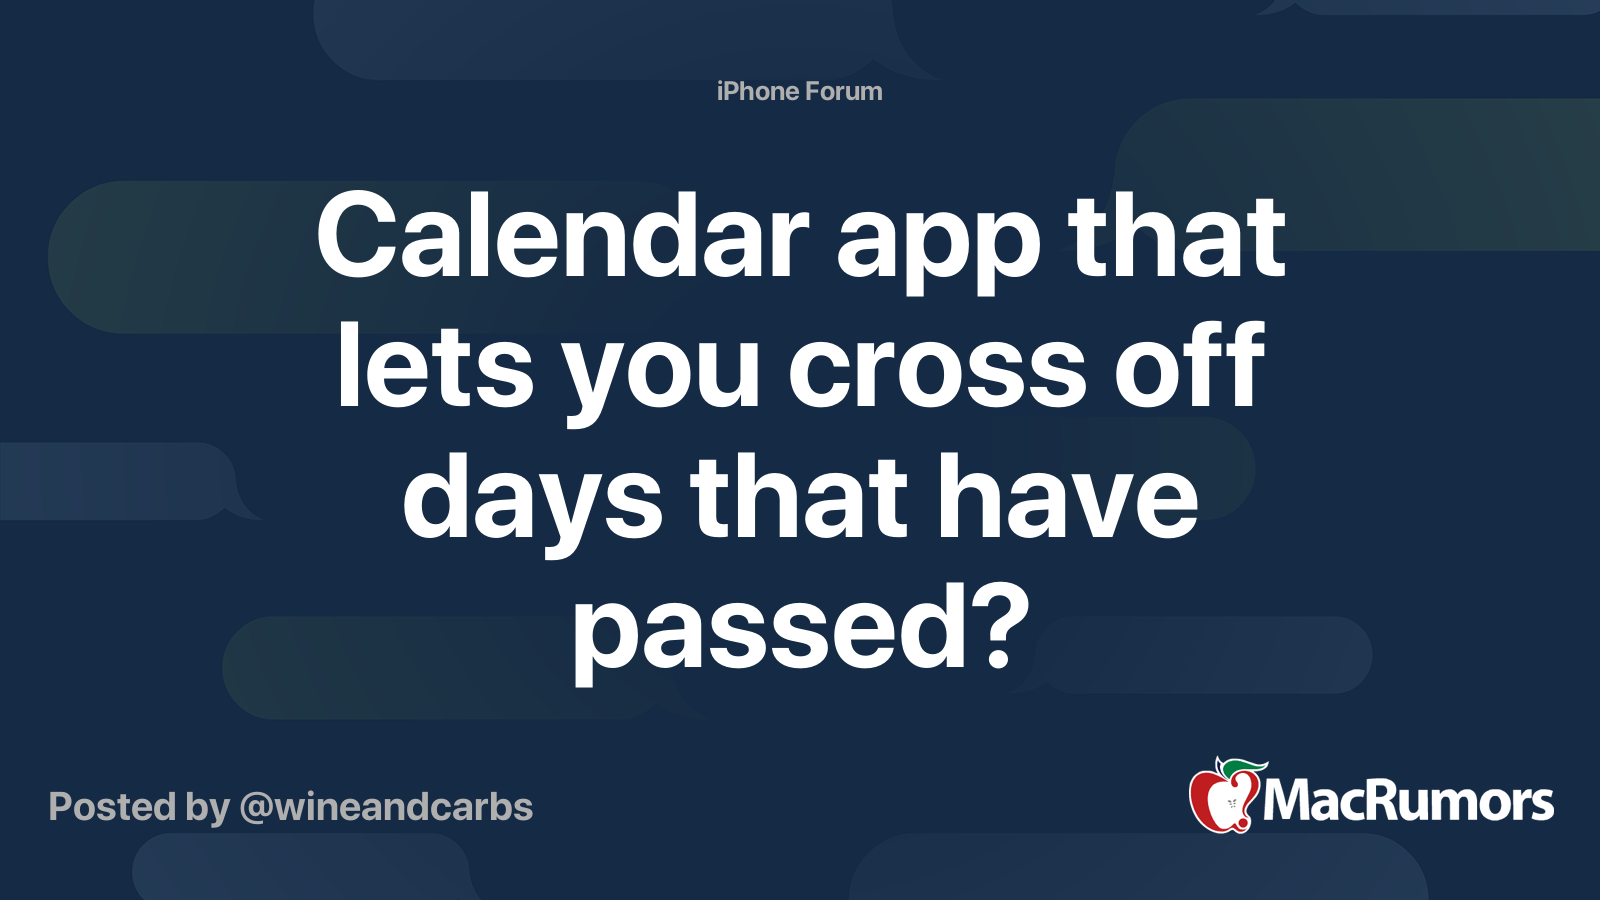 Calendar app that lets you cross off days that have passed? MacRumors